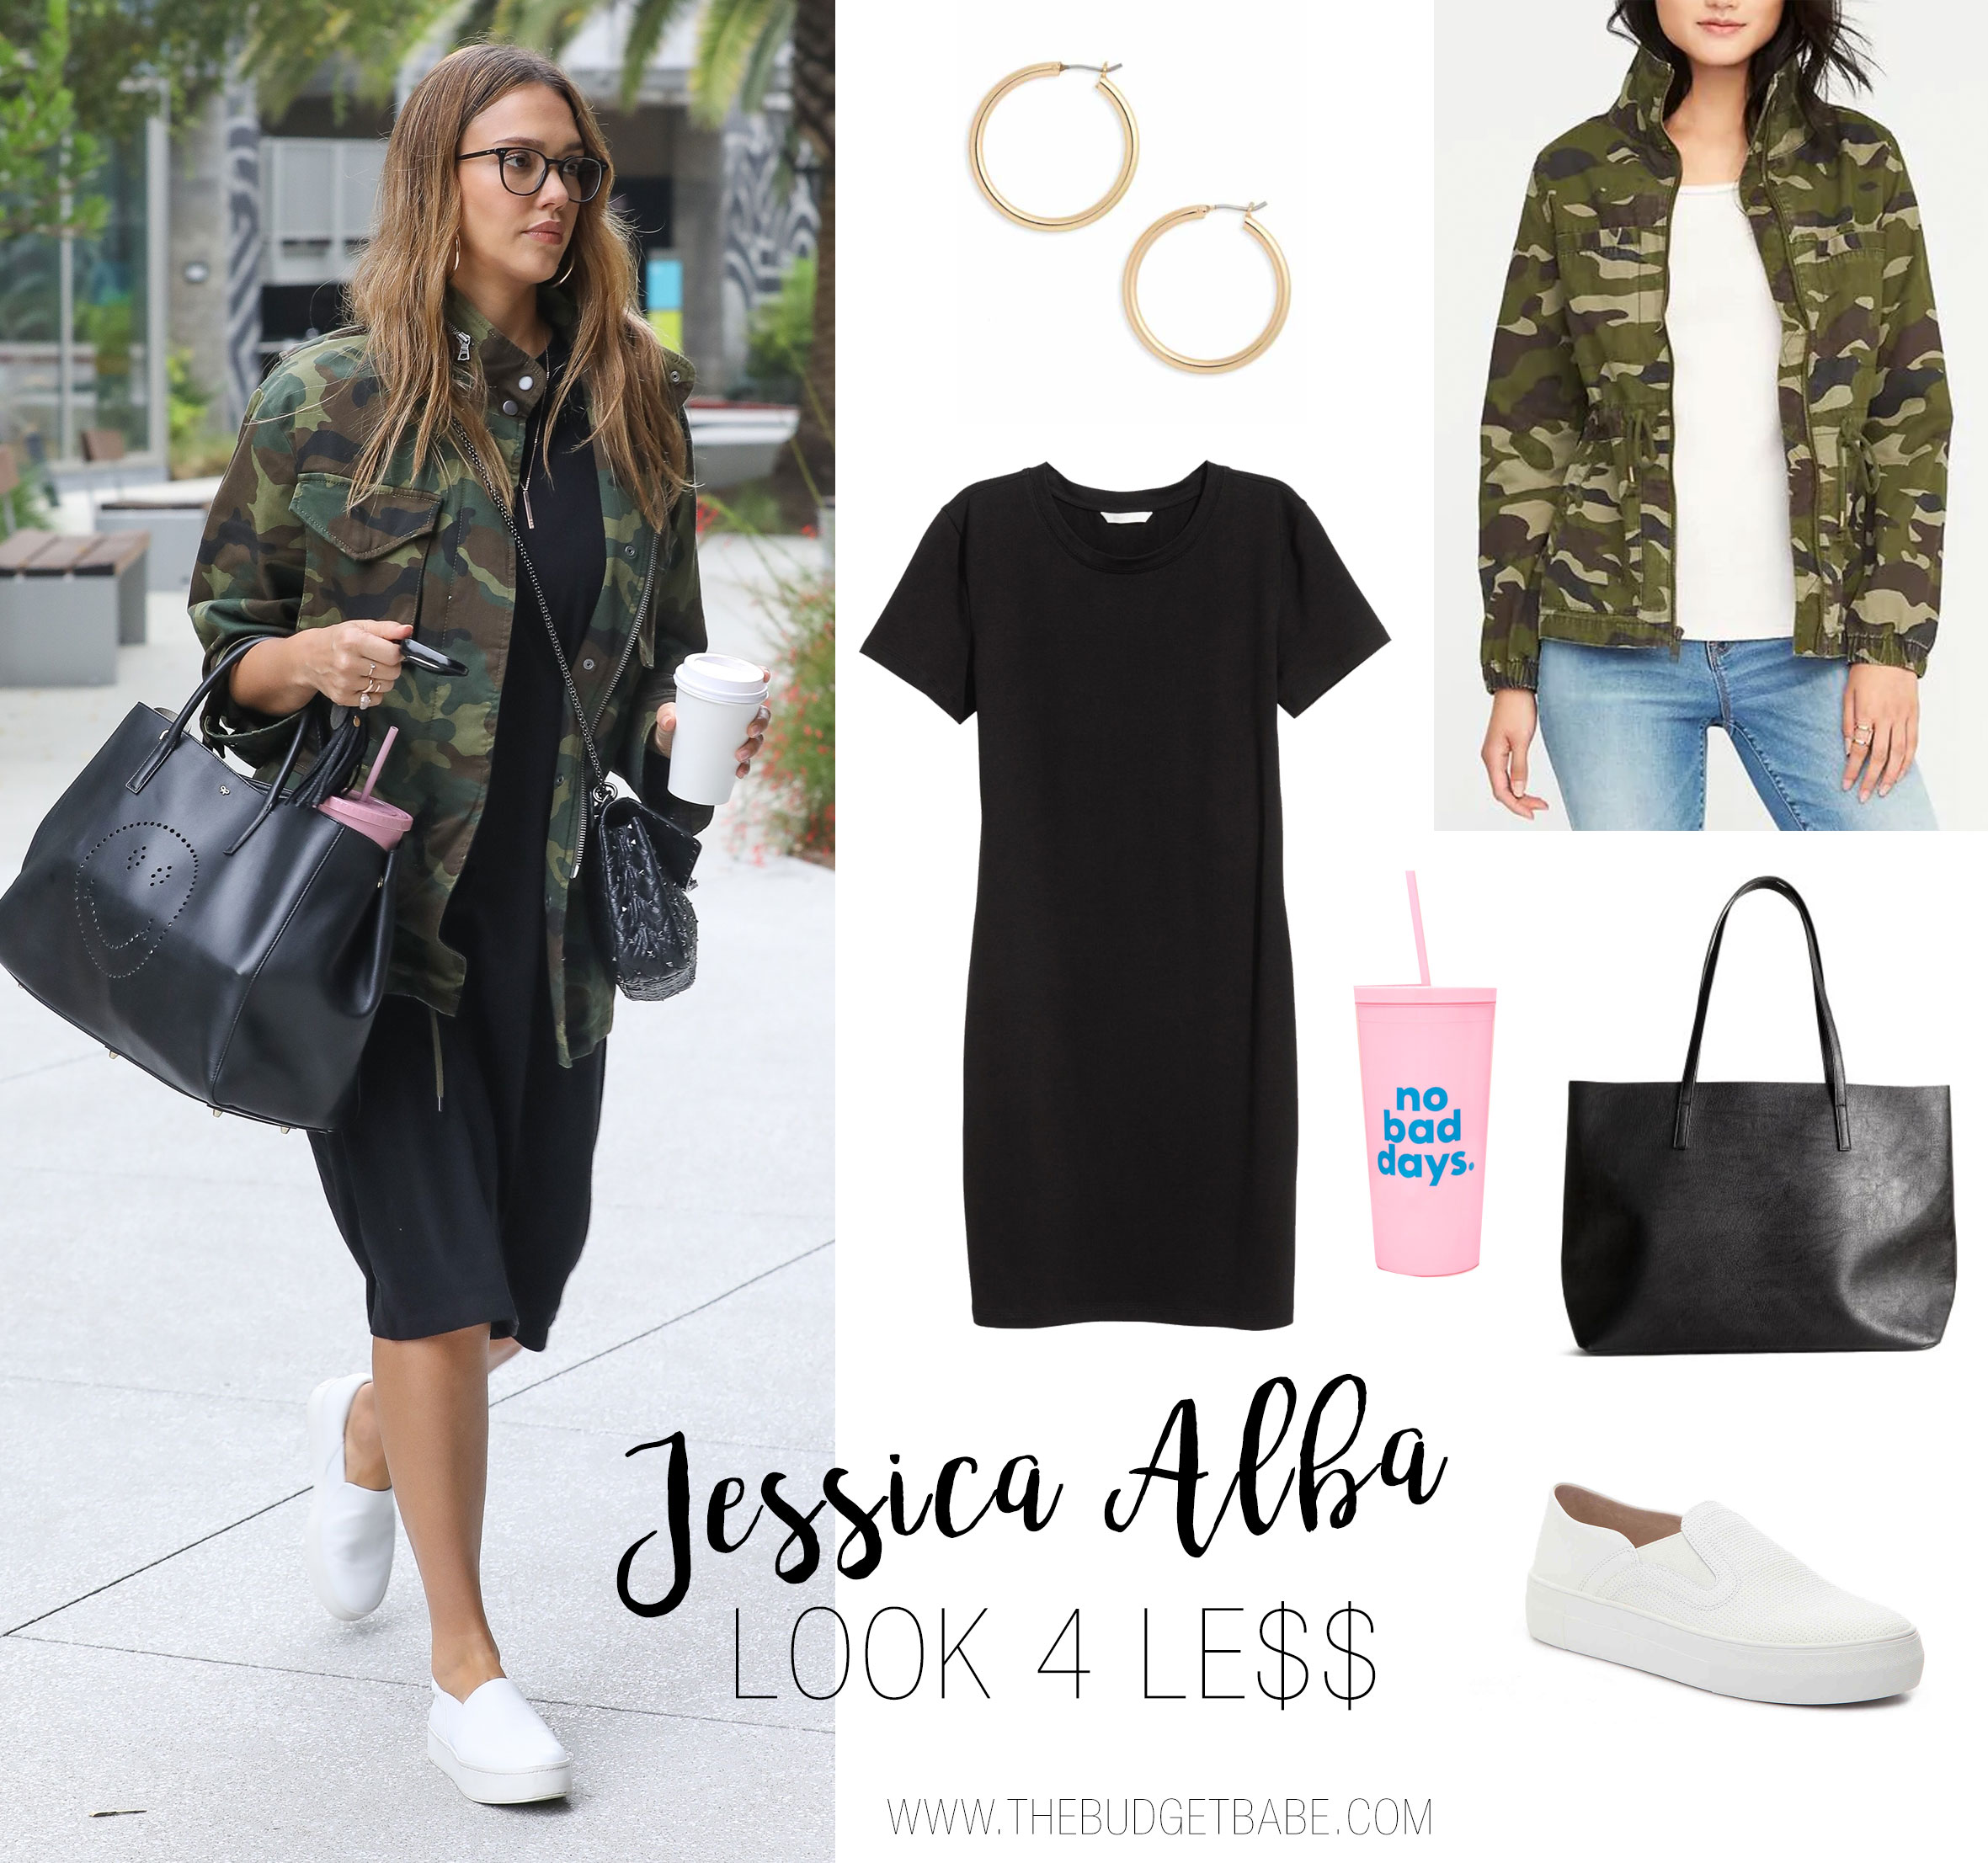 Jessica Alba wears her Alice and Olivia camo jacket with a black dress, Vince sneakers and Anya Hindmarch Smiley Tote Bag.